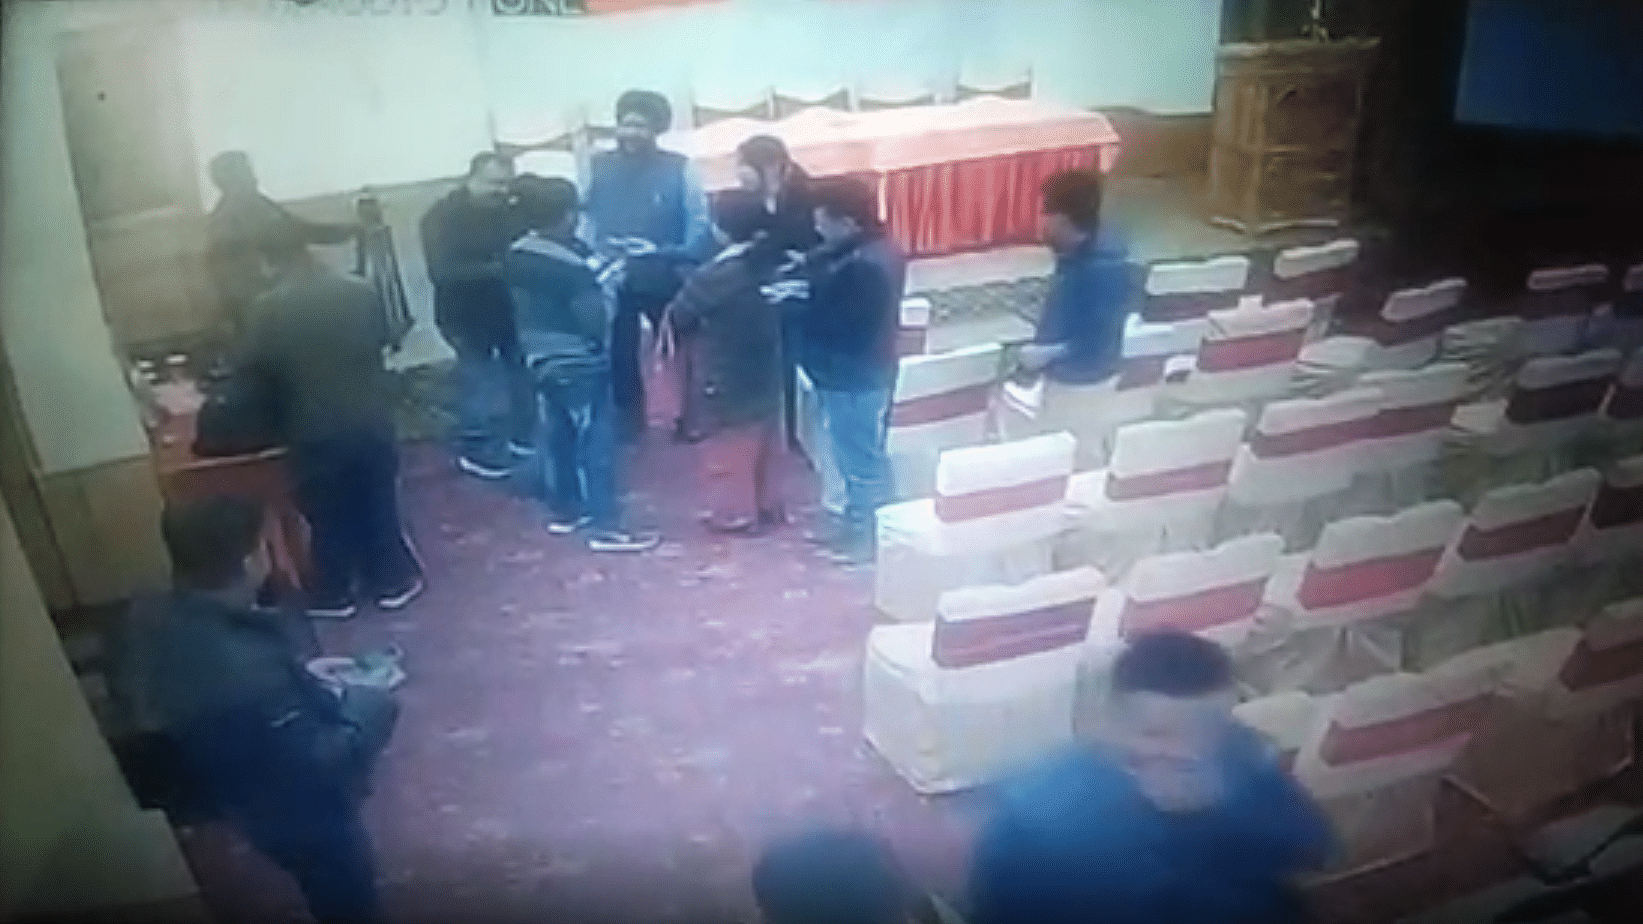 The CCTV footage of the attempted bribery.